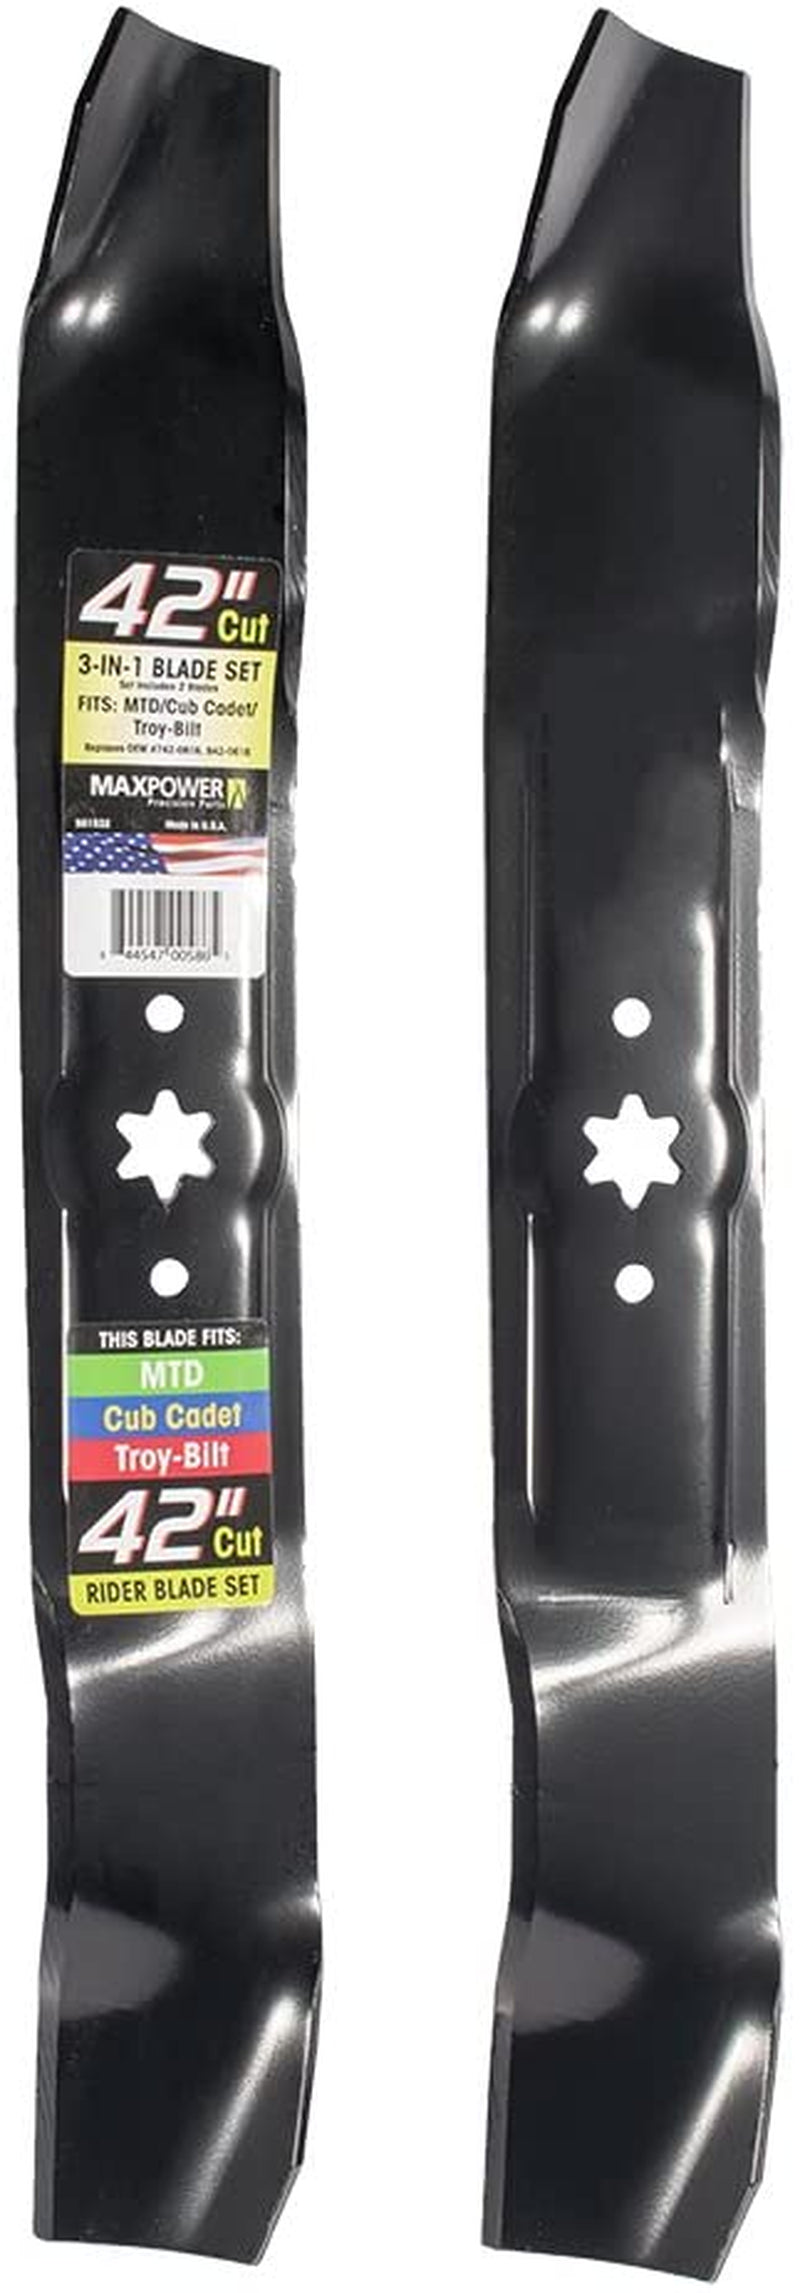 MaxPower, Maxpower 561532B 2-Blade Mulching Set for 42-Inch Cut Mtd/Cub Cadet/Troy-Bilt Replaces 742-04126, 742-0616, 742-0616A and Many Others, Black